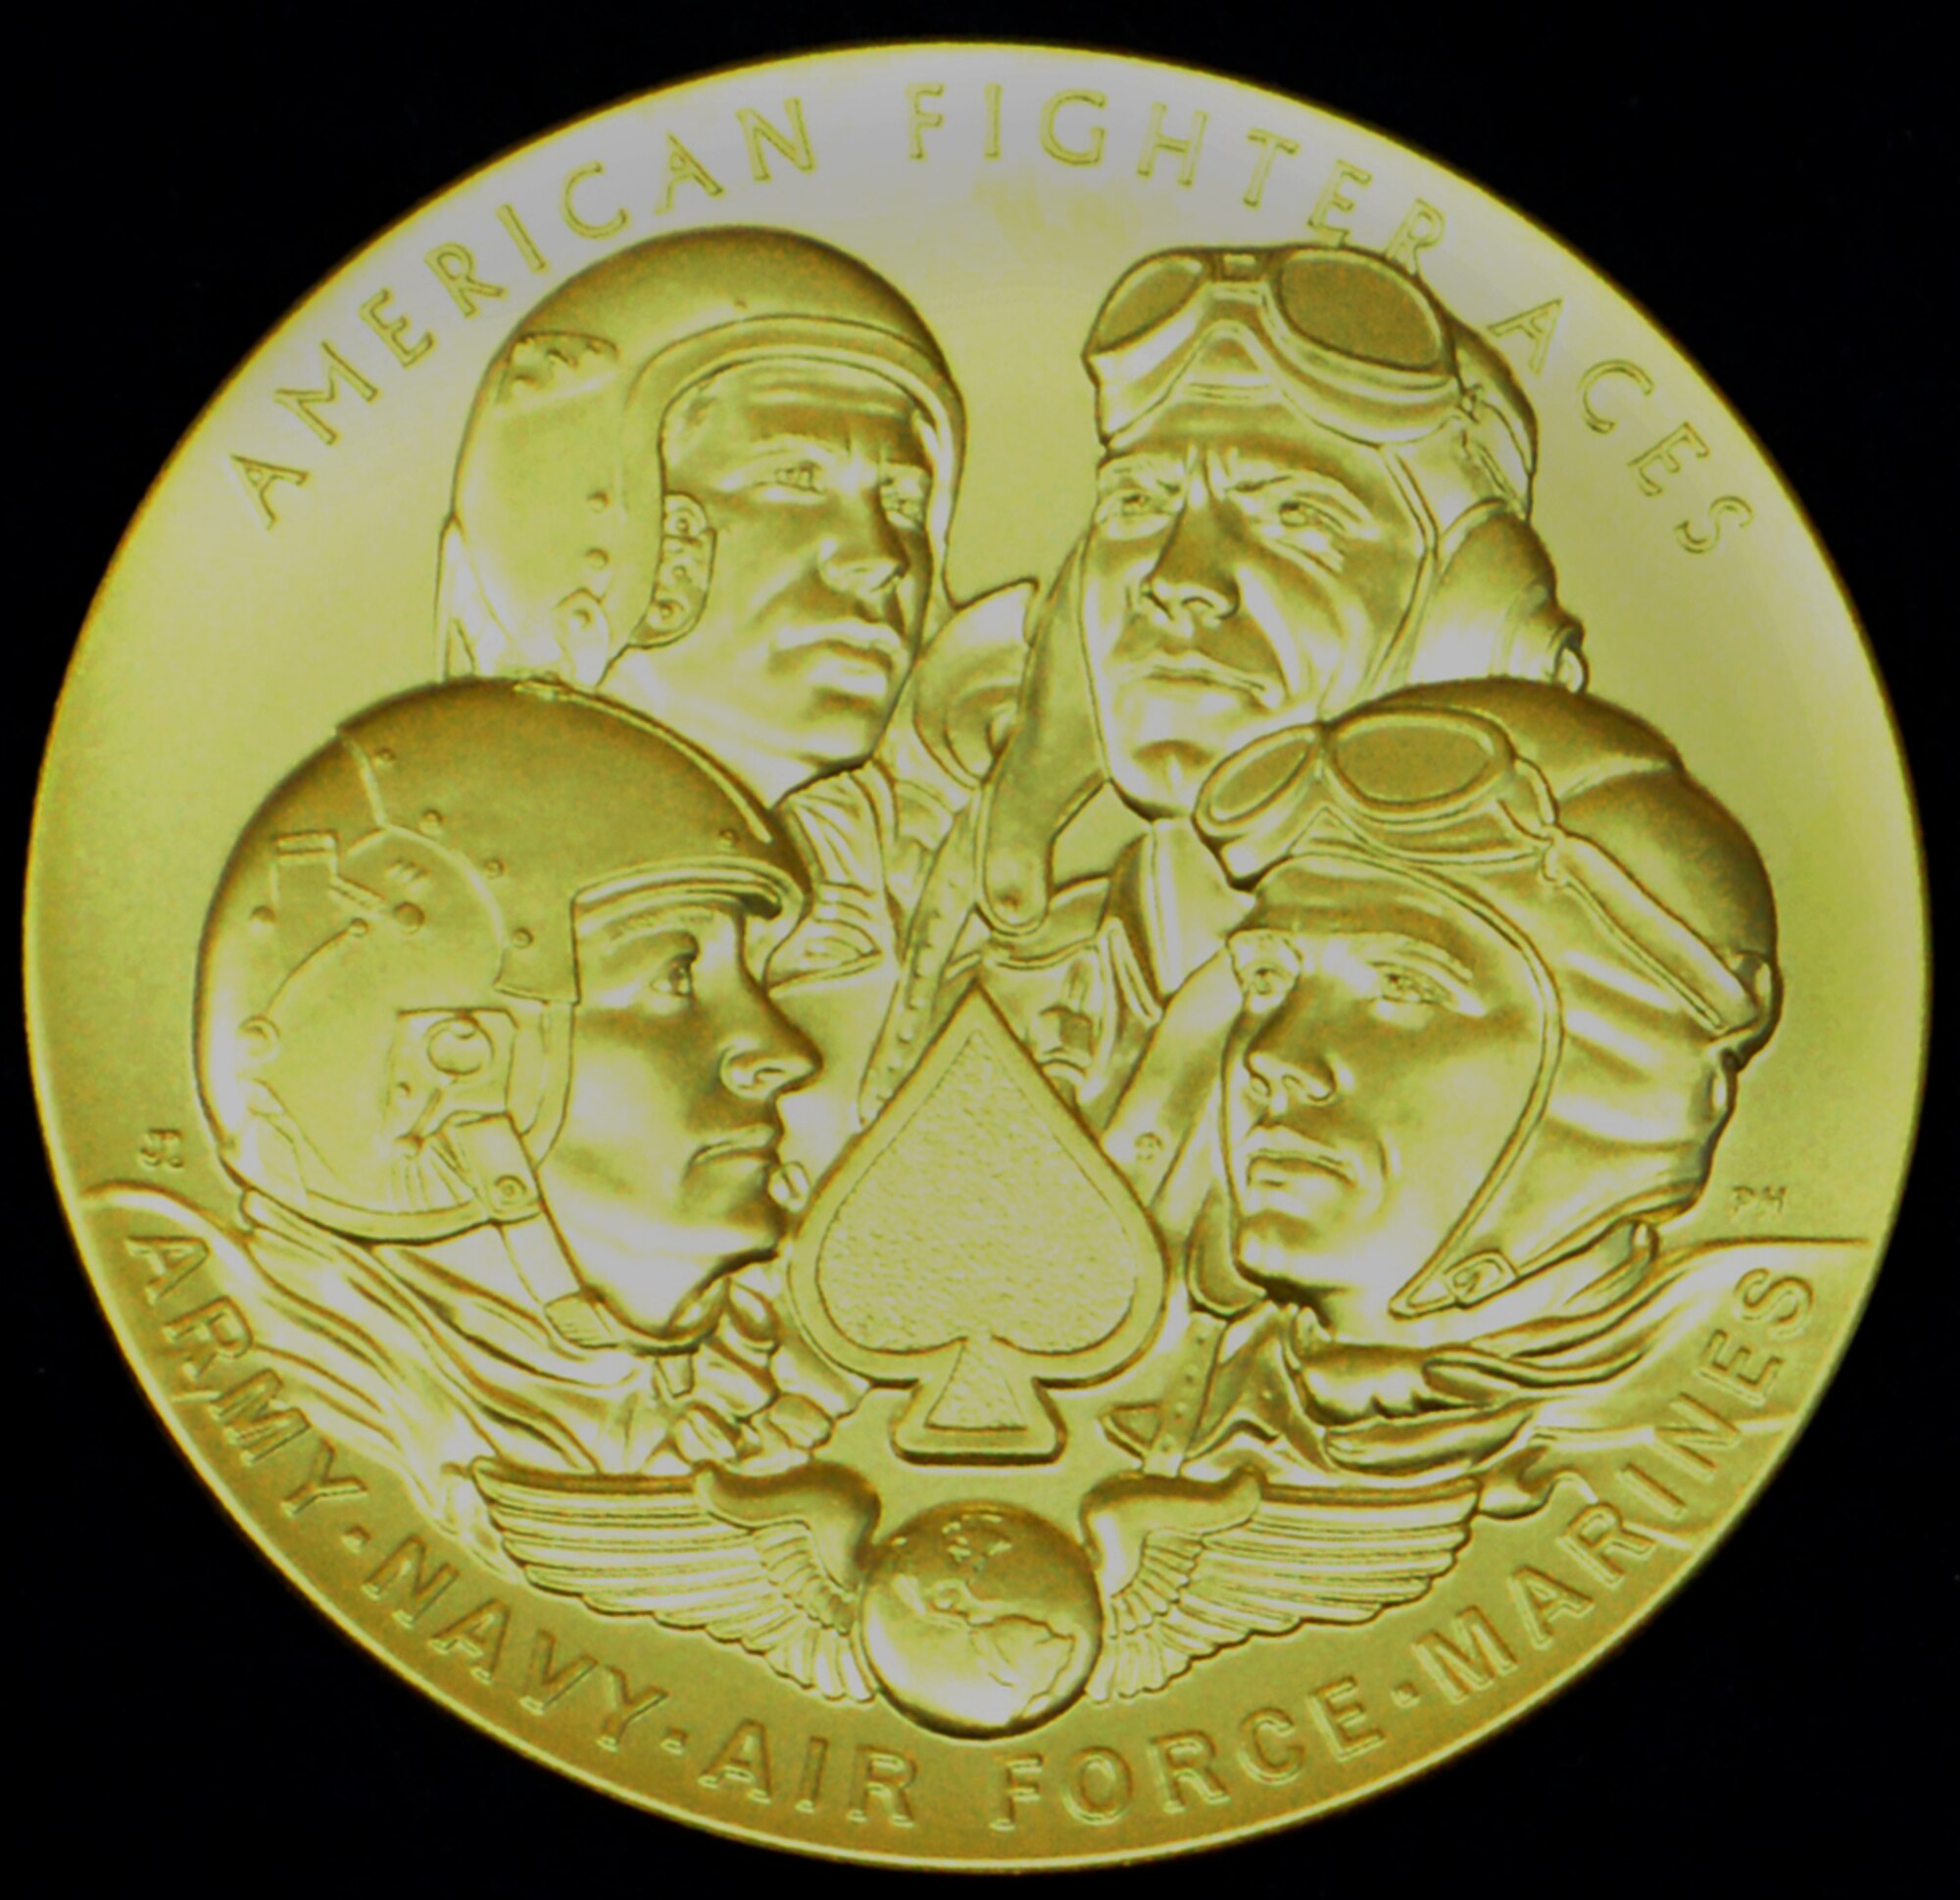 The Congressional Gold Medal was presented to the American Fighter Aces Association May 20, 2015, at the U.S. Capitol Visitor Center Emancipation Hall. The medal is the highest civilian honor Congress can give on behalf of the American people. (U.S. Air Force photo illustration/Staff Sgt. Torri Ingalsbe) 